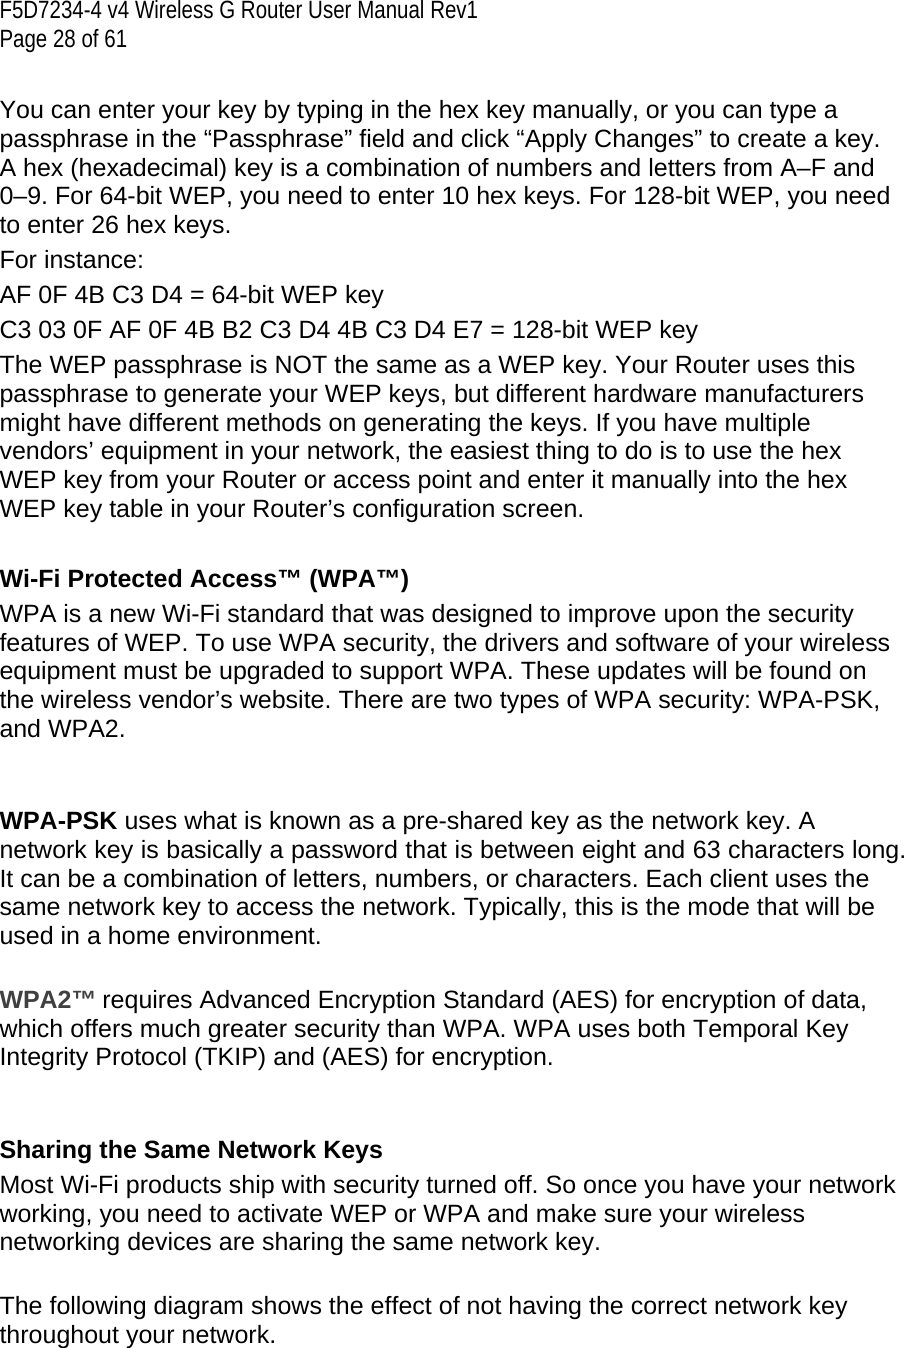 F5D7234-4 v4 Wireless G Router User Manual Rev1  Page 28 of 61   You can enter your key by typing in the hex key manually, or you can type a passphrase in the “Passphrase” field and click “Apply Changes” to create a key. A hex (hexadecimal) key is a combination of numbers and letters from A–F and 0–9. For 64-bit WEP, you need to enter 10 hex keys. For 128-bit WEP, you need to enter 26 hex keys.  For instance: AF 0F 4B C3 D4 = 64-bit WEP key C3 03 0F AF 0F 4B B2 C3 D4 4B C3 D4 E7 = 128-bit WEP key The WEP passphrase is NOT the same as a WEP key. Your Router uses this passphrase to generate your WEP keys, but different hardware manufacturers might have different methods on generating the keys. If you have multiple vendors’ equipment in your network, the easiest thing to do is to use the hex WEP key from your Router or access point and enter it manually into the hex WEP key table in your Router’s configuration screen.  Wi-Fi Protected Access™ (WPA™) WPA is a new Wi-Fi standard that was designed to improve upon the security features of WEP. To use WPA security, the drivers and software of your wireless equipment must be upgraded to support WPA. These updates will be found on the wireless vendor’s website. There are two types of WPA security: WPA-PSK, and WPA2.     WPA-PSK uses what is known as a pre-shared key as the network key. A network key is basically a password that is between eight and 63 characters long. It can be a combination of letters, numbers, or characters. Each client uses the same network key to access the network. Typically, this is the mode that will be used in a home environment.   WPA2™ requires Advanced Encryption Standard (AES) for encryption of data, which offers much greater security than WPA. WPA uses both Temporal Key Integrity Protocol (TKIP) and (AES) for encryption.   Sharing the Same Network Keys Most Wi-Fi products ship with security turned off. So once you have your network working, you need to activate WEP or WPA and make sure your wireless networking devices are sharing the same network key.   The following diagram shows the effect of not having the correct network key throughout your network. 